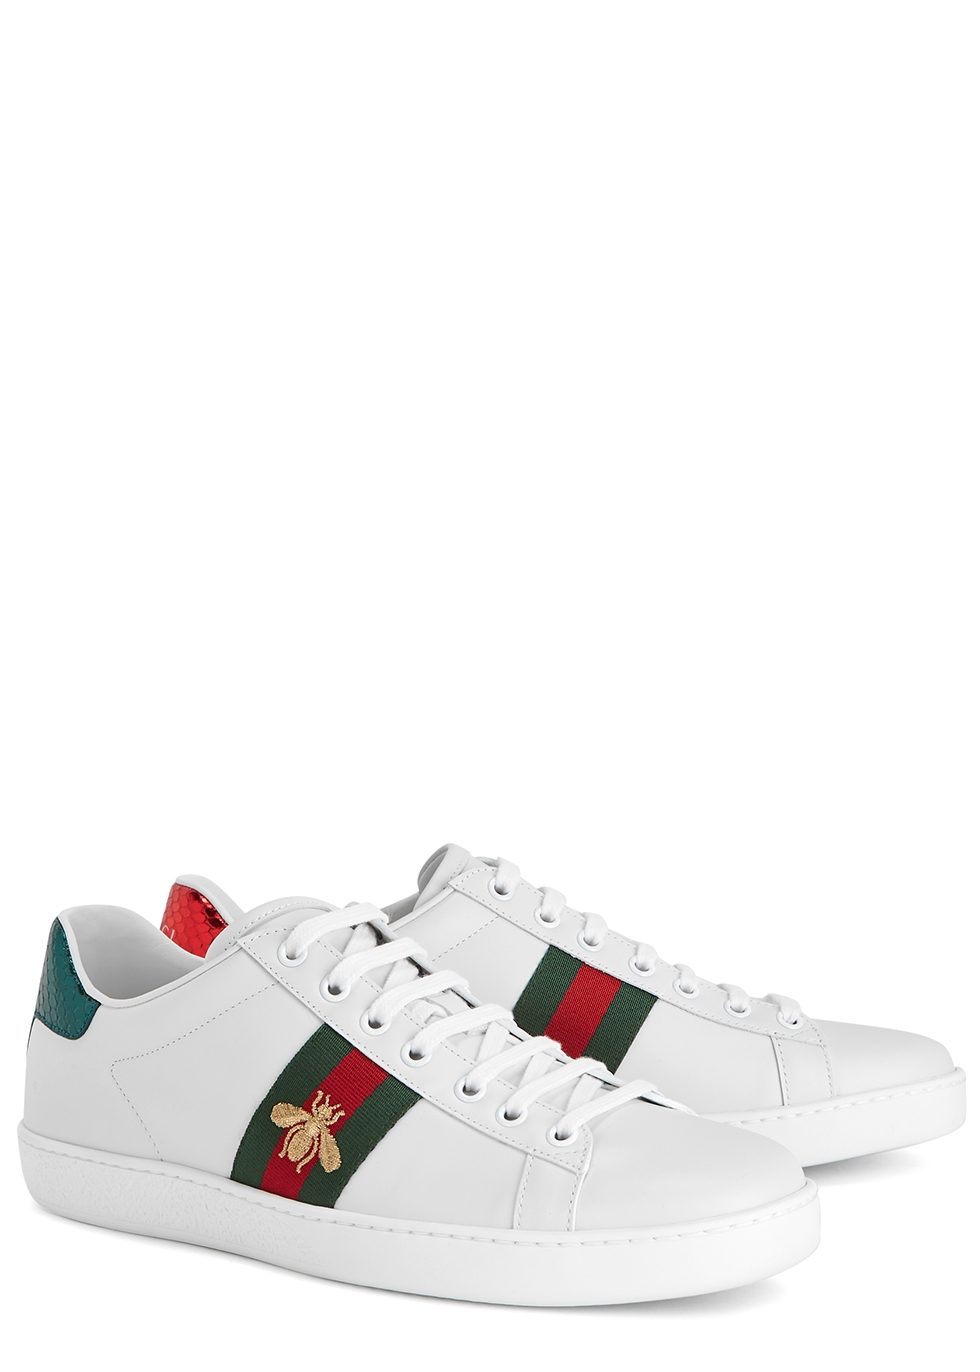 Gucci Ace embroidered white leather 